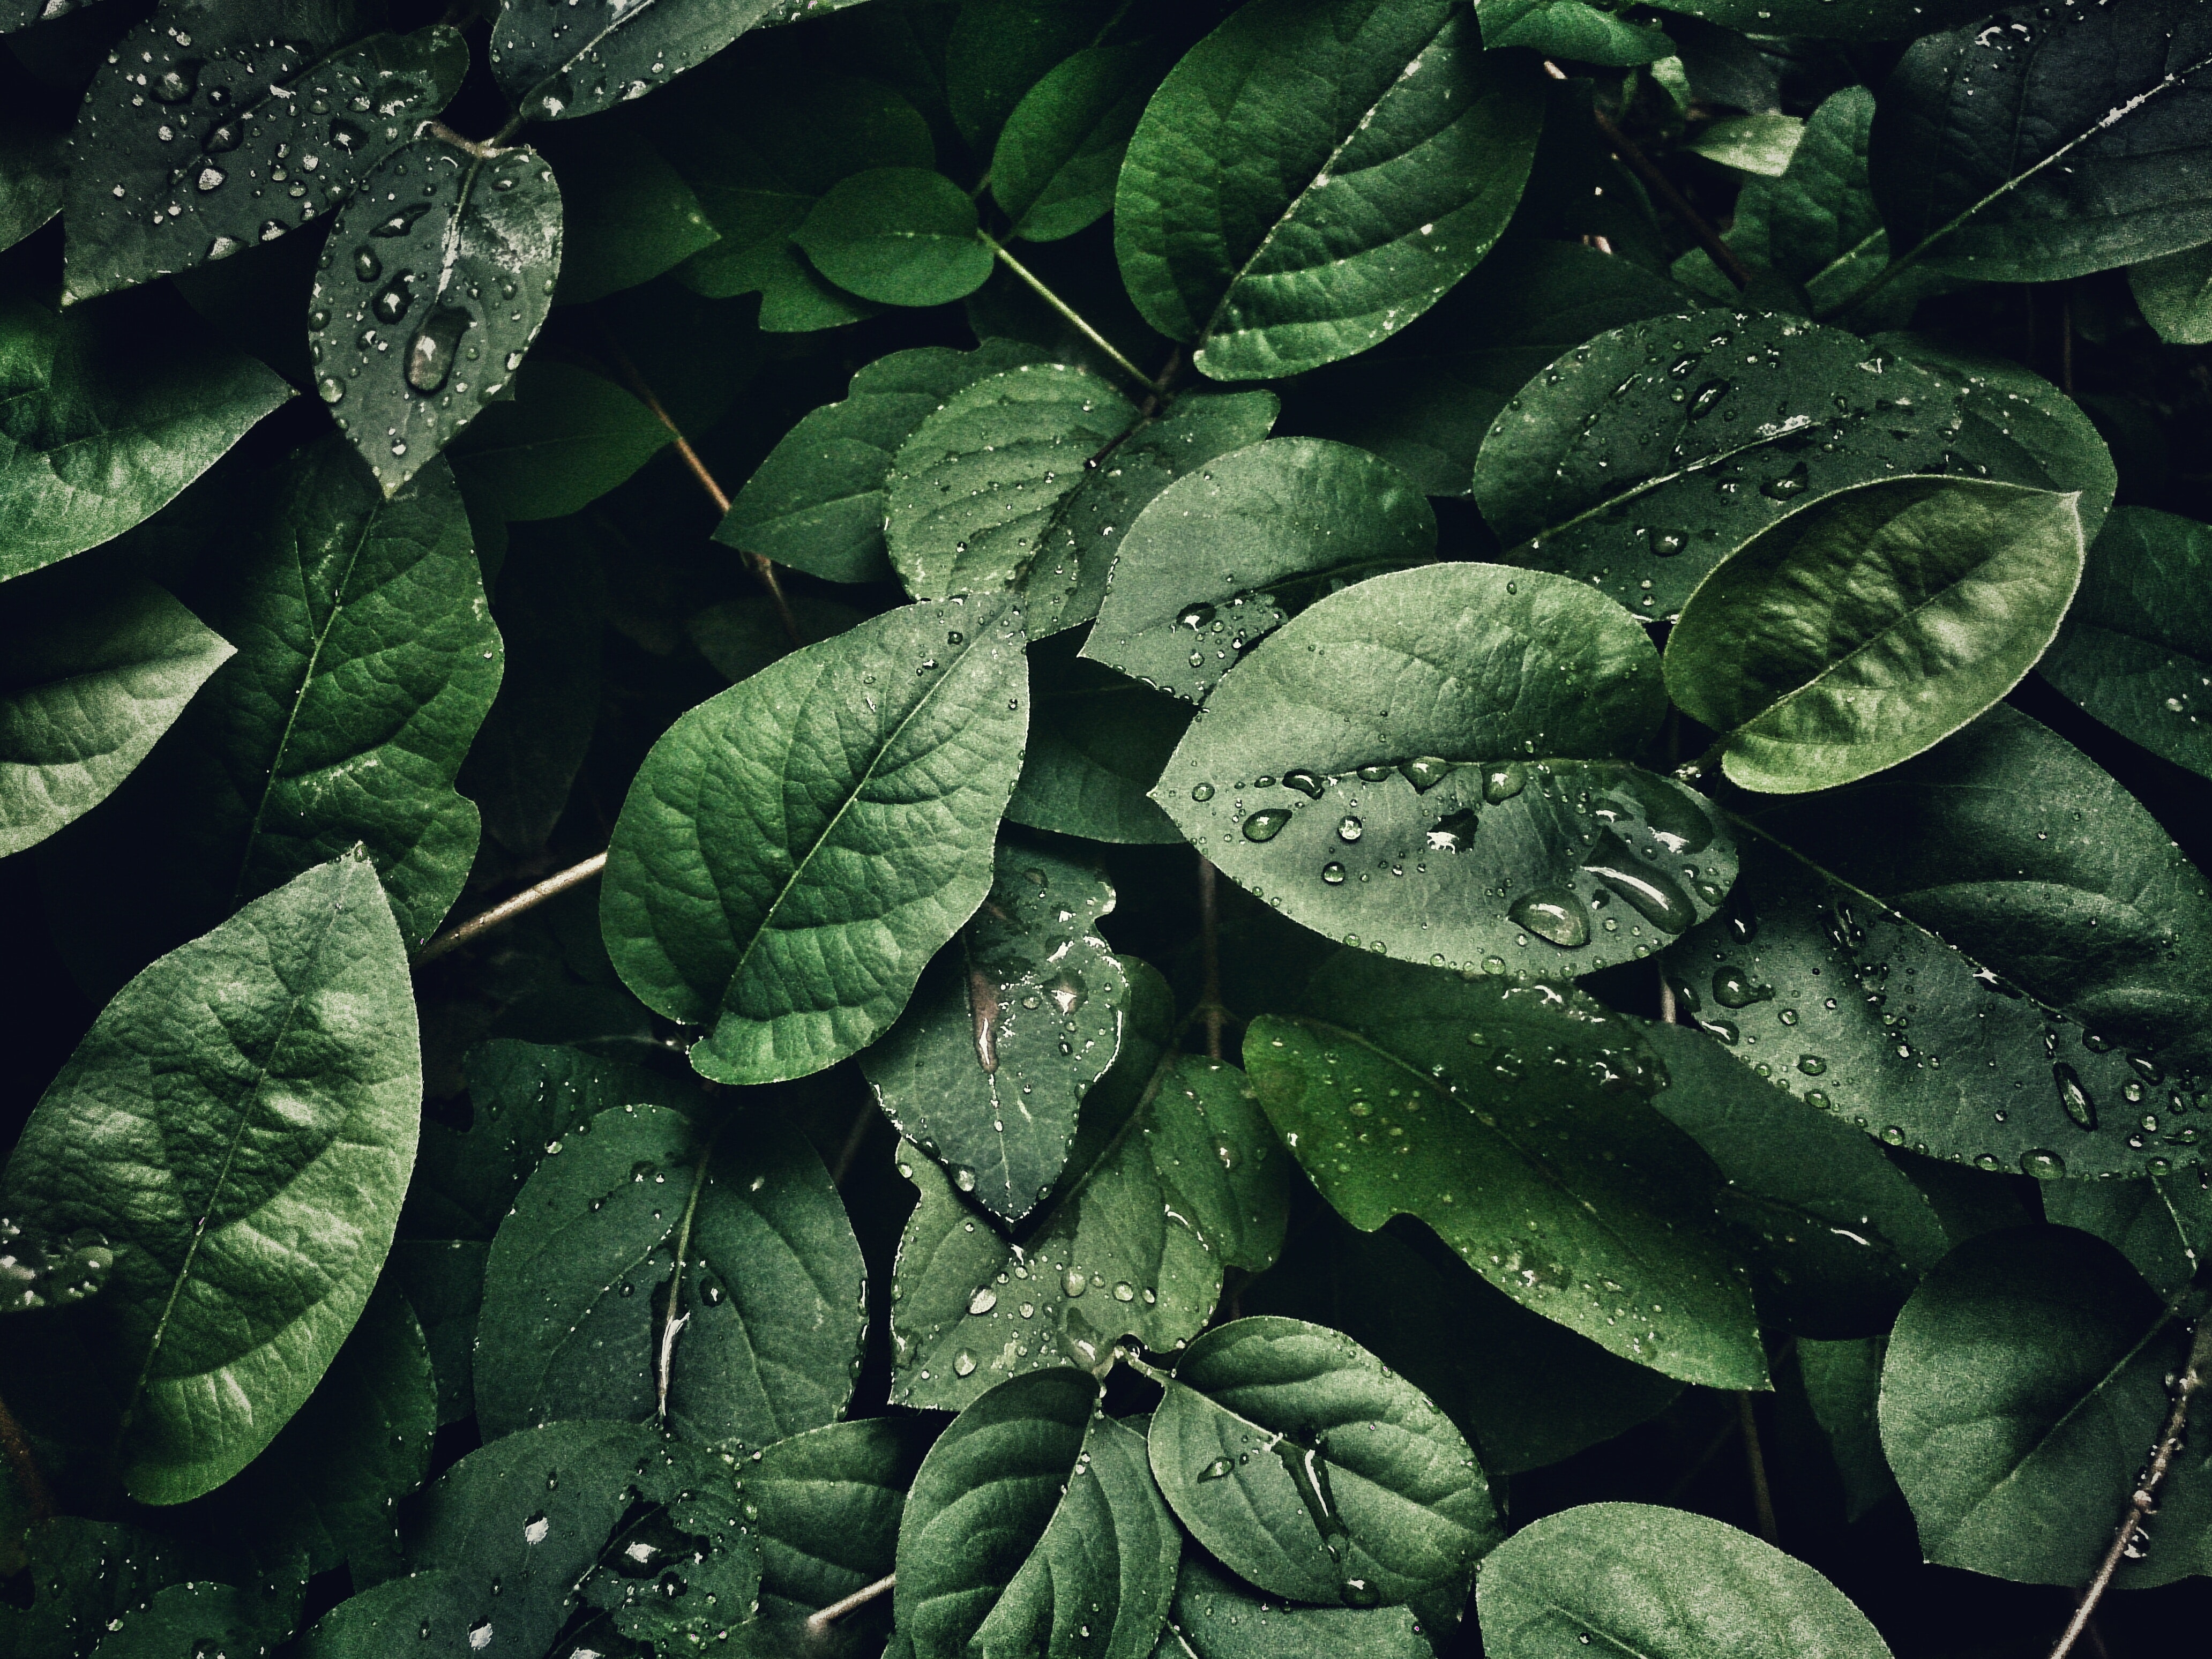 Plants photos download the best free plants stock photos hd images